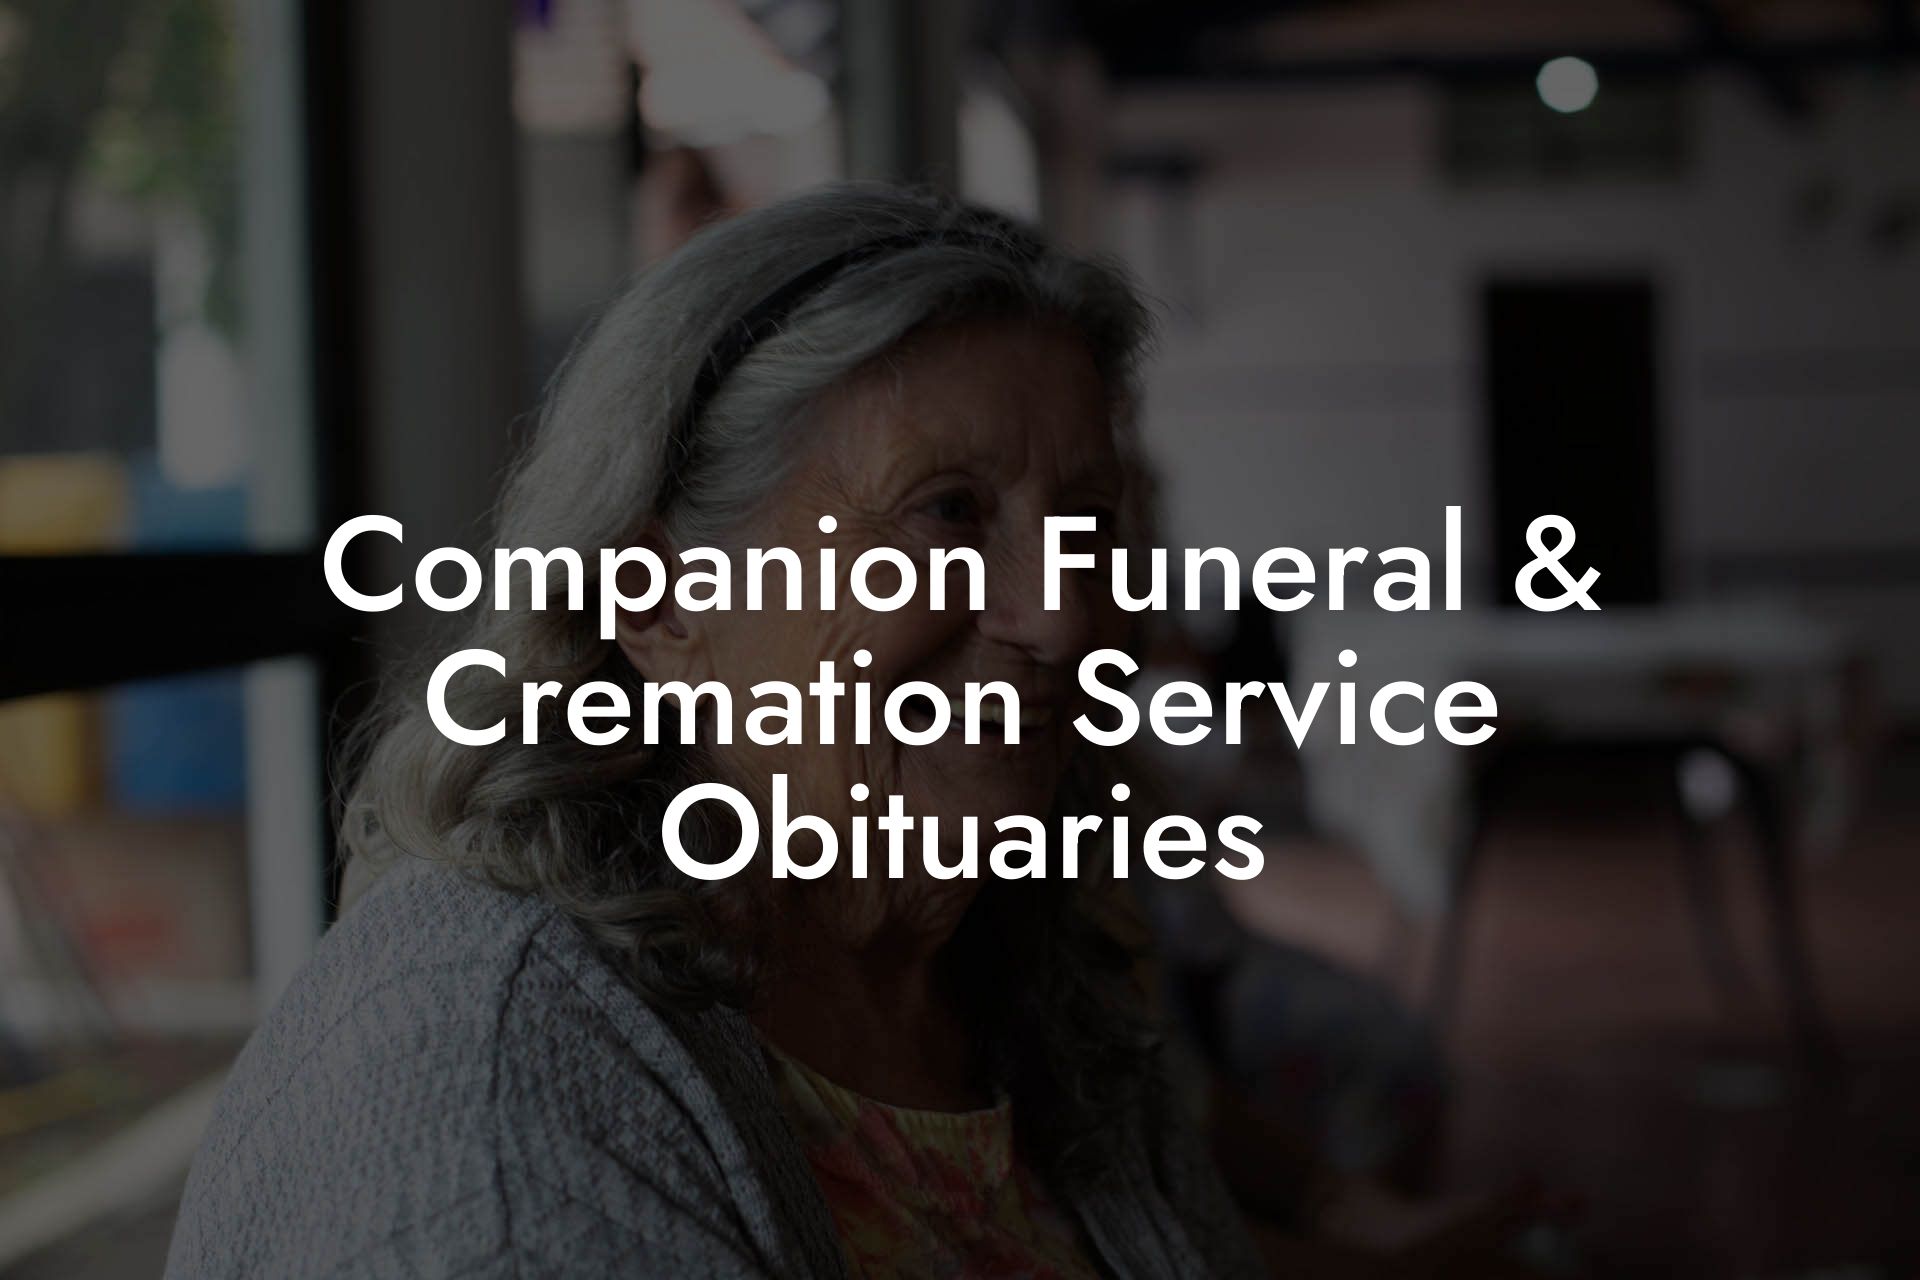 Companion Funeral & Cremation Service Obituaries - Eulogy Assistant